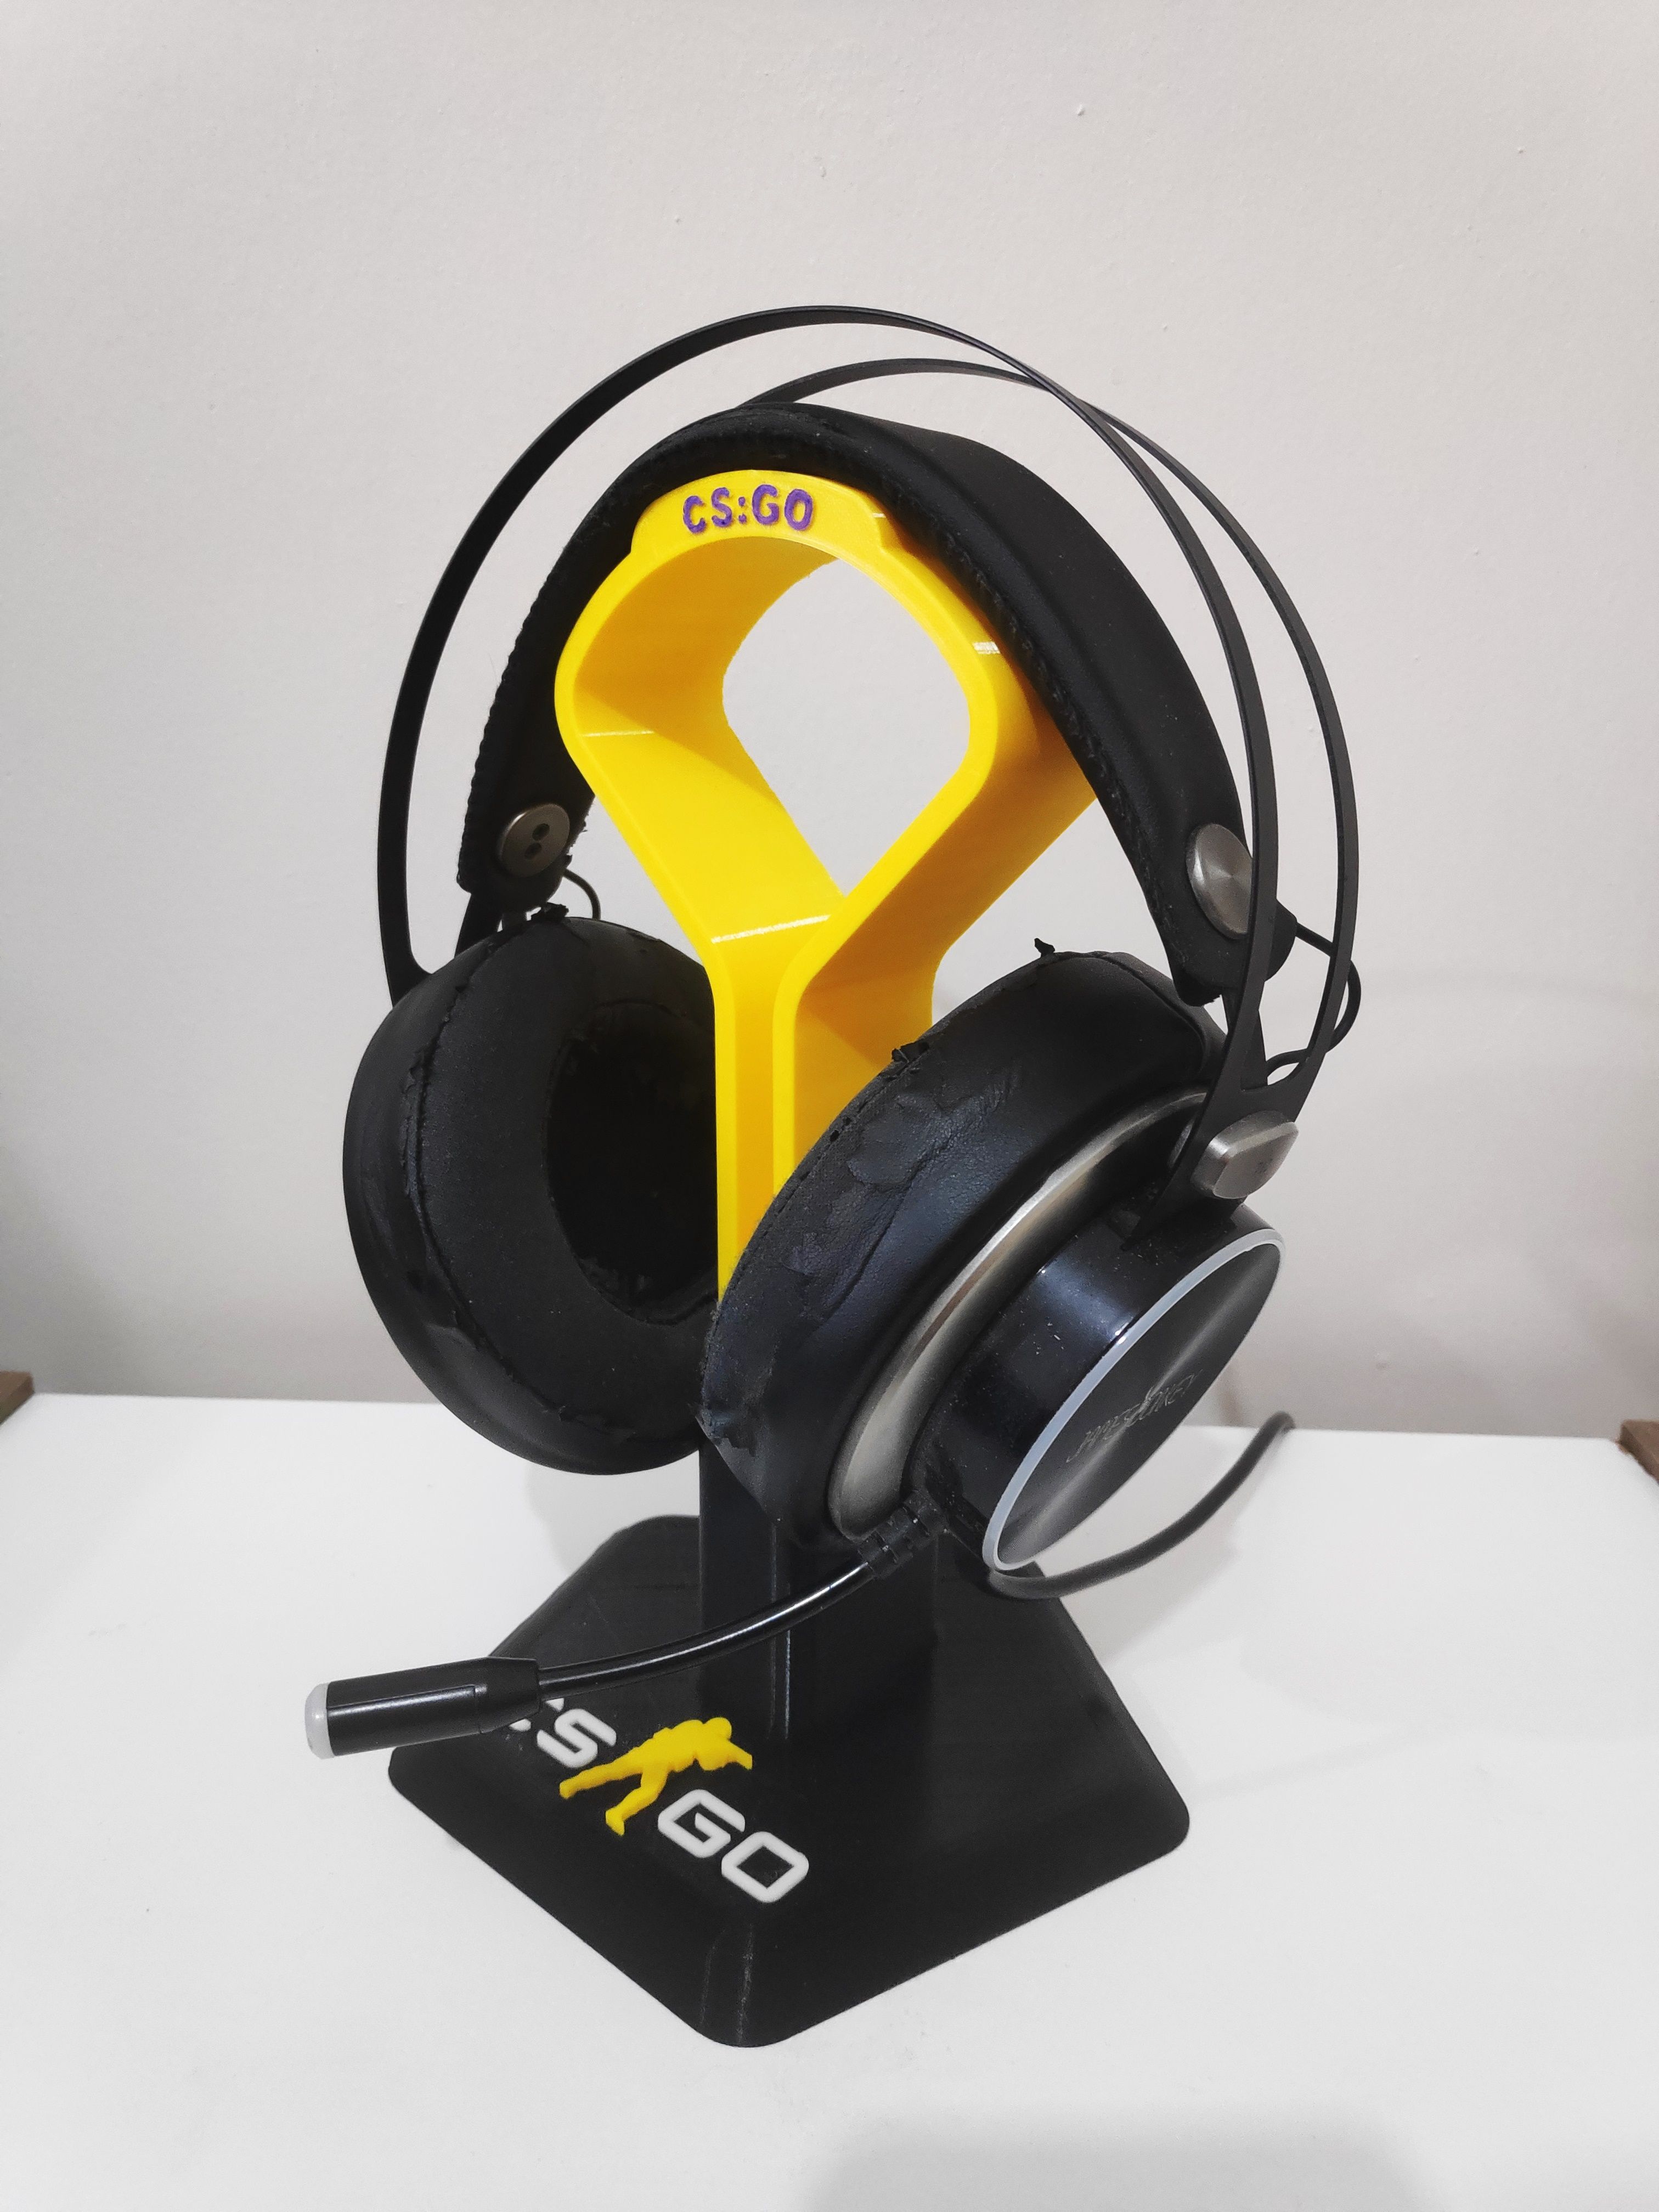 IMG_20220107_100359_1.jpg Download STL file CS:GO Headset Holder • 3D printable object, stabtrimout